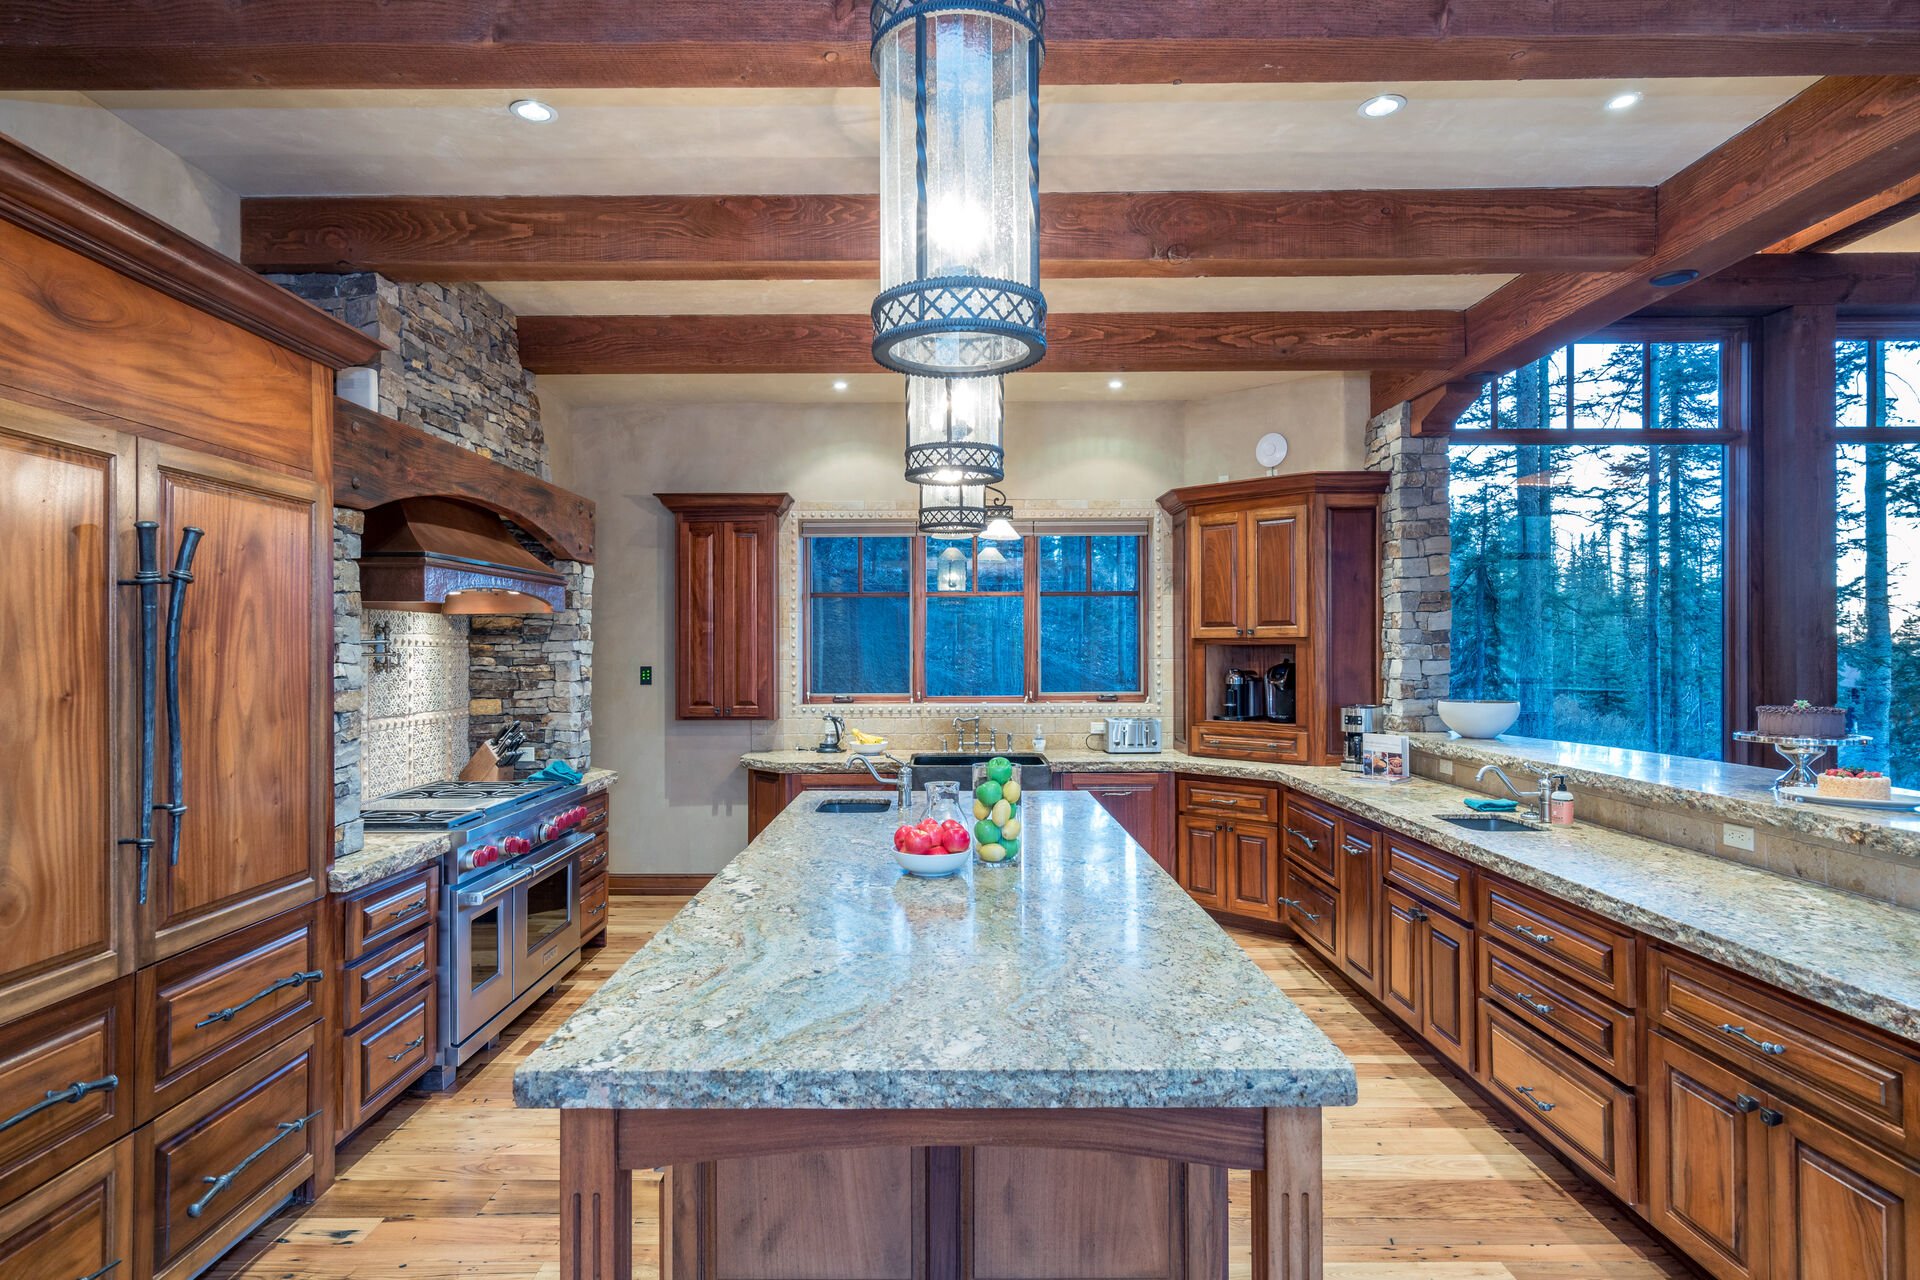 Upscale appliances and details in the kitchen